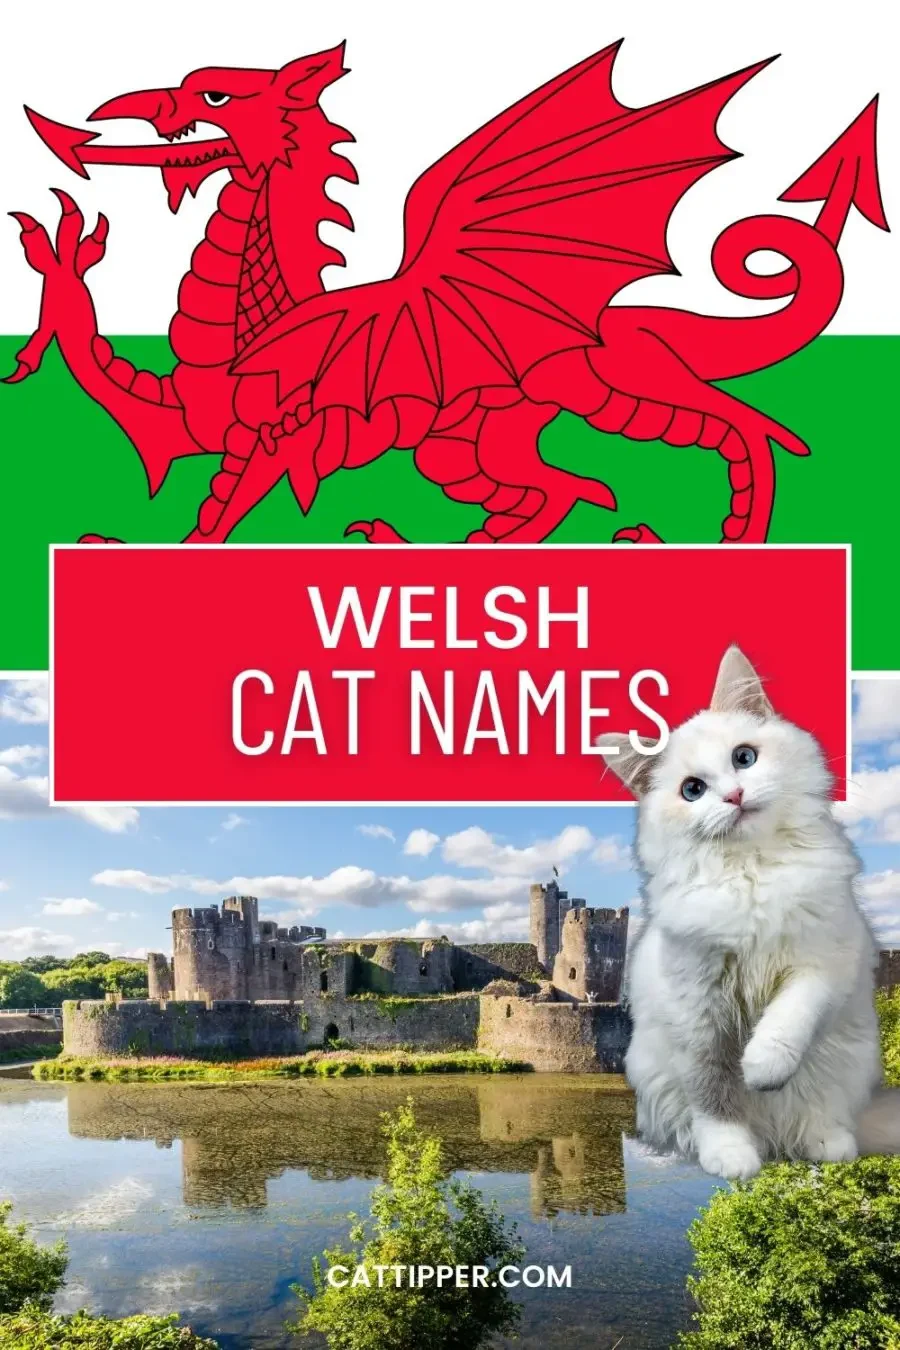 Welsh cat Names - image of Welsh Castle and Welsh Flag with white cat